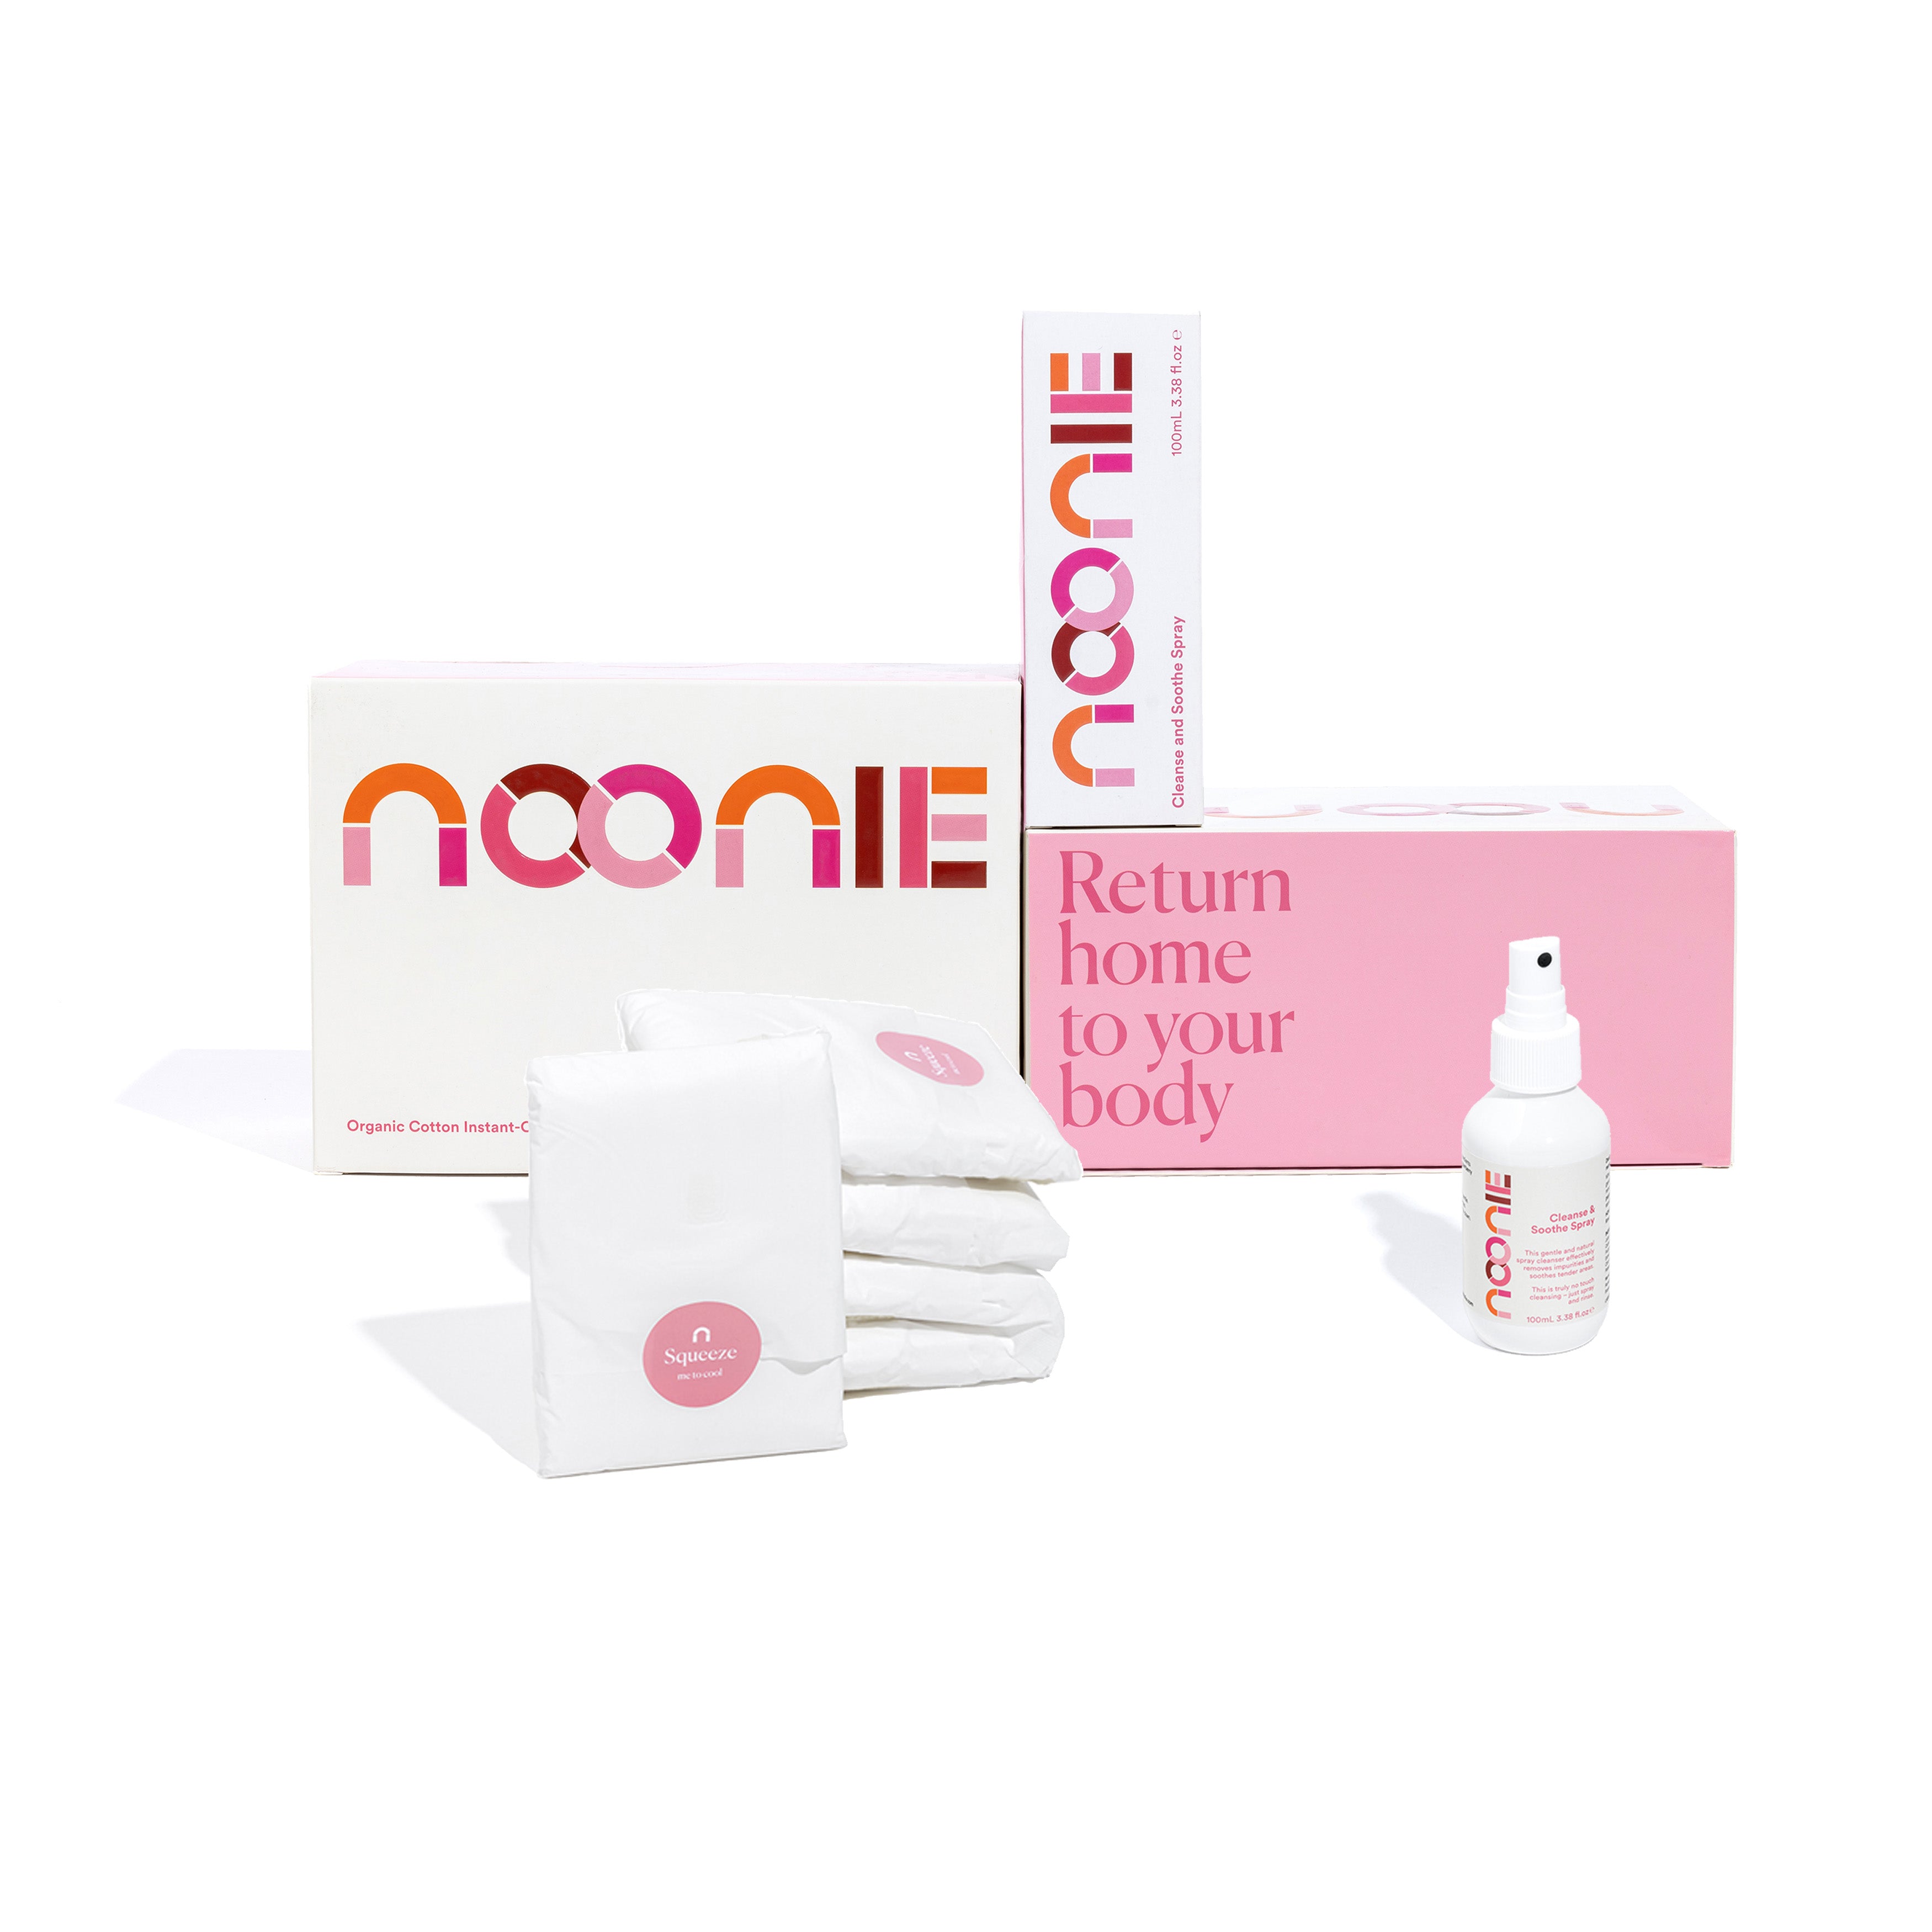 Noonie Postpartum Recovery Kit with 2 packs of Instant-Cooling Maternity Padsicles and 1 Cleanse and Soothe Perineal Spray with Packagings